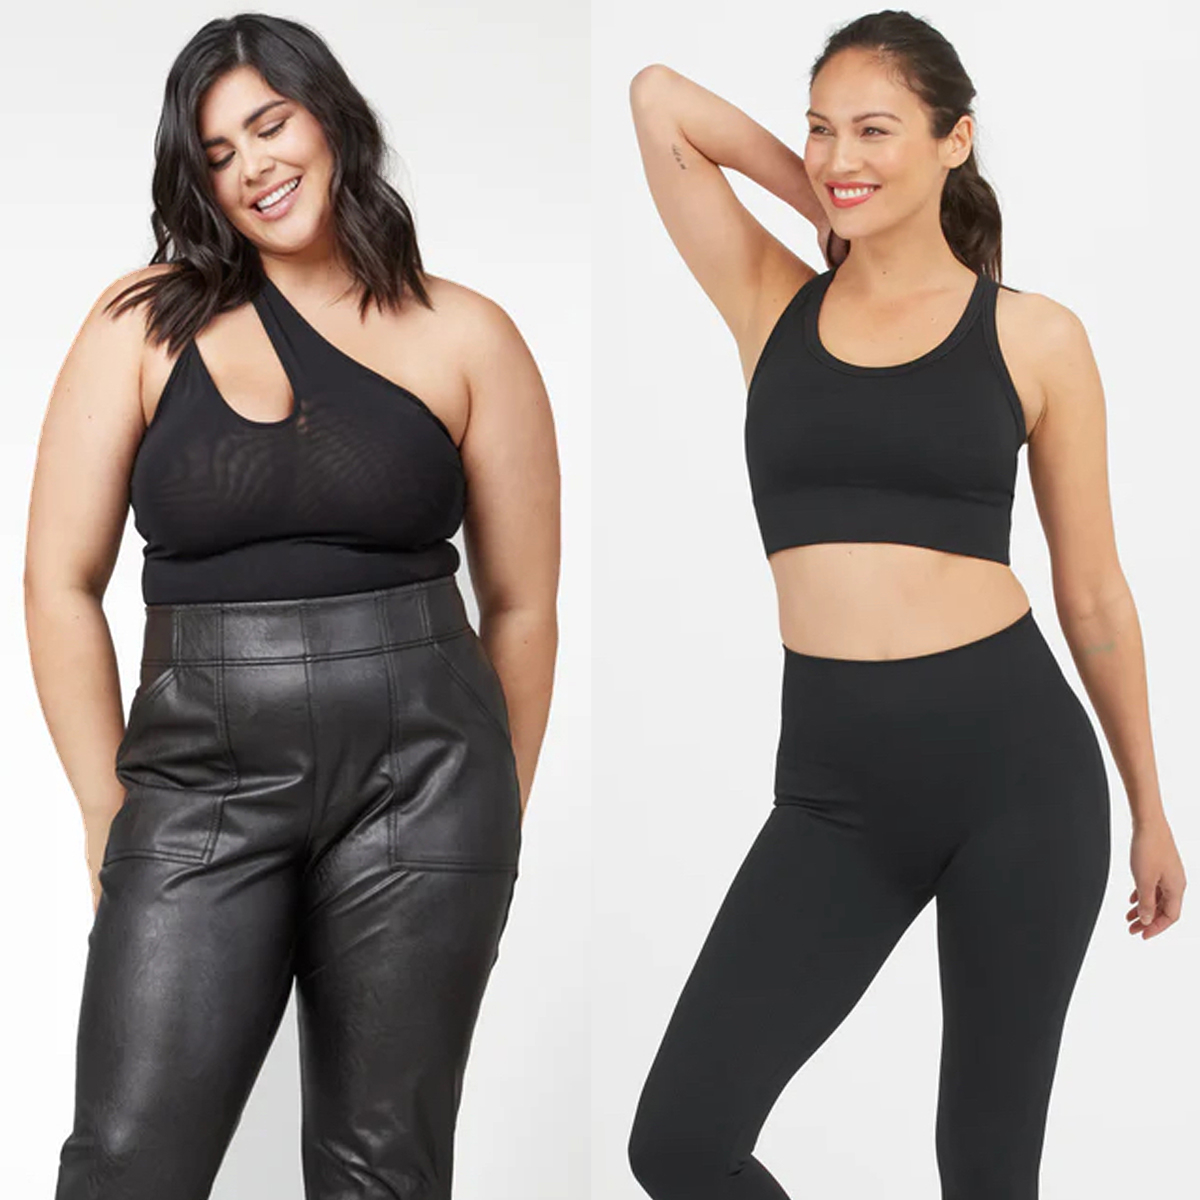 Spanx 50% Off Deals Are Too Good To Pass Up: Leggings, Skirts & More